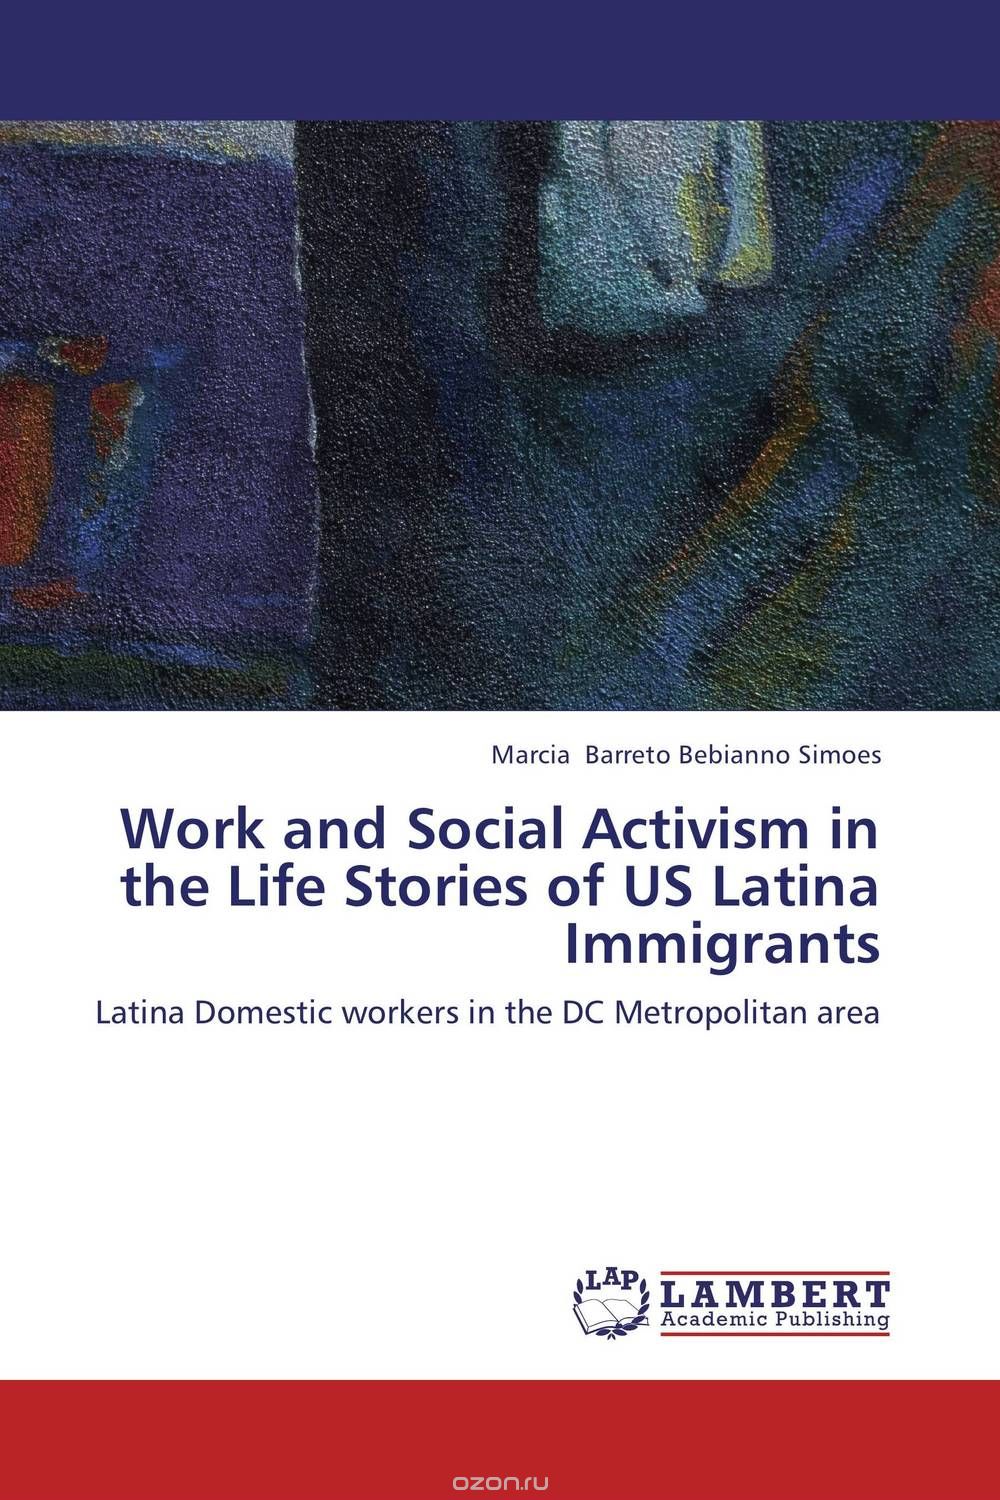 Скачать книгу "Work and Social Activism in the Life Stories of US Latina Immigrants"